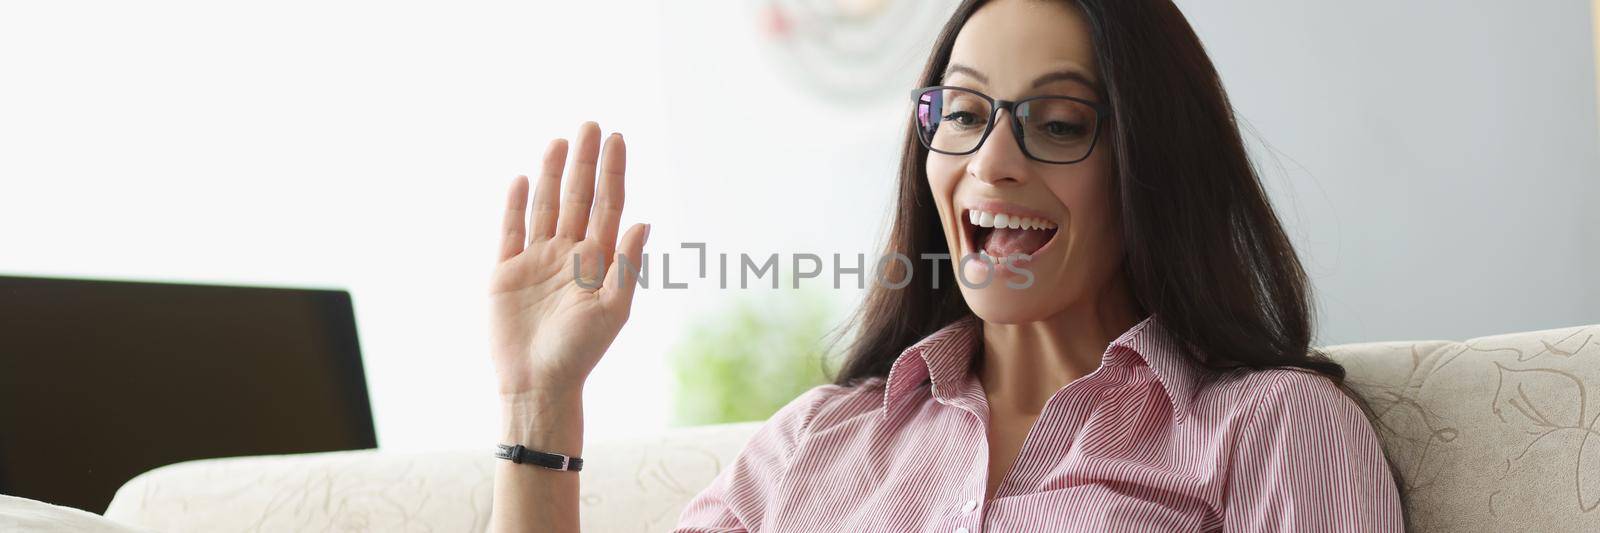 Pretty young woman wave hello show gesture online on laptop by kuprevich